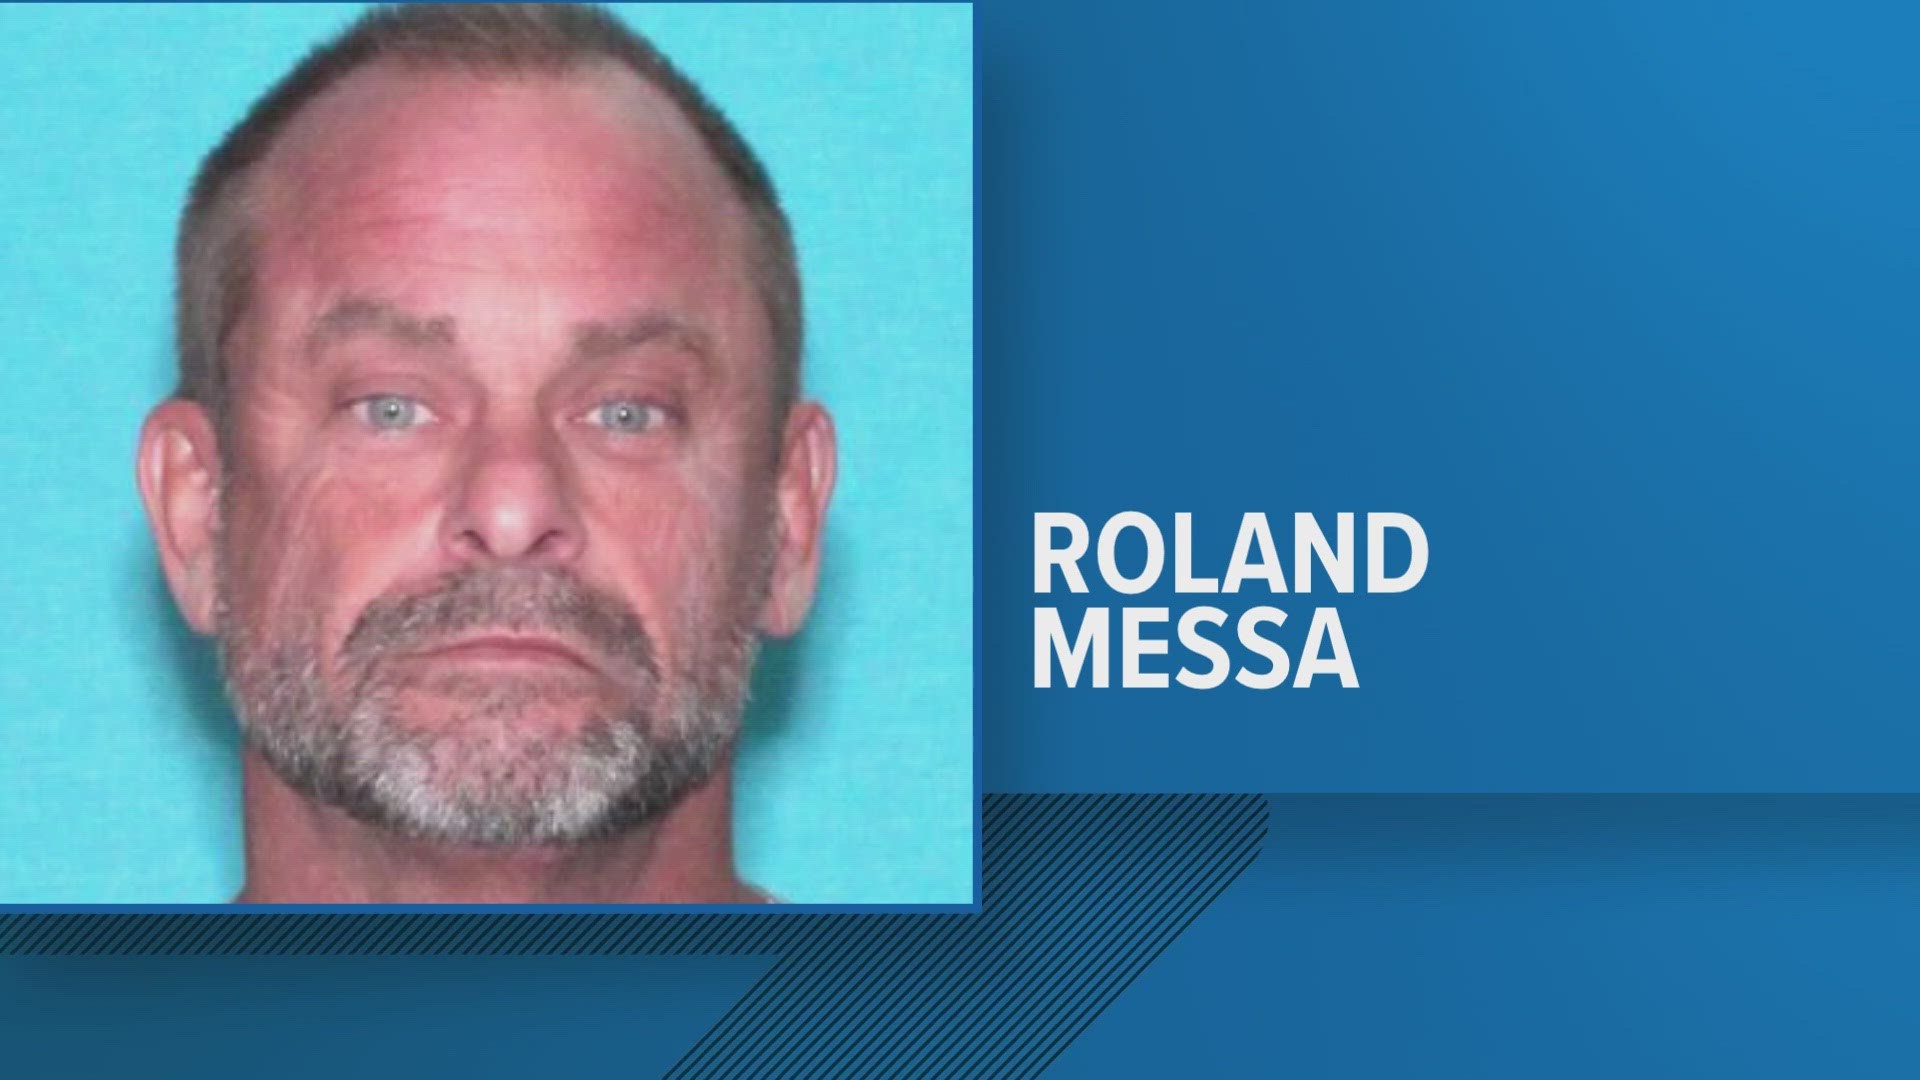 Law enforcement said they are searching for Roland Emile Messa, 54, from Harahan after he apparently drove his pickup truck off of the Chalmette Ferry, Saturday.